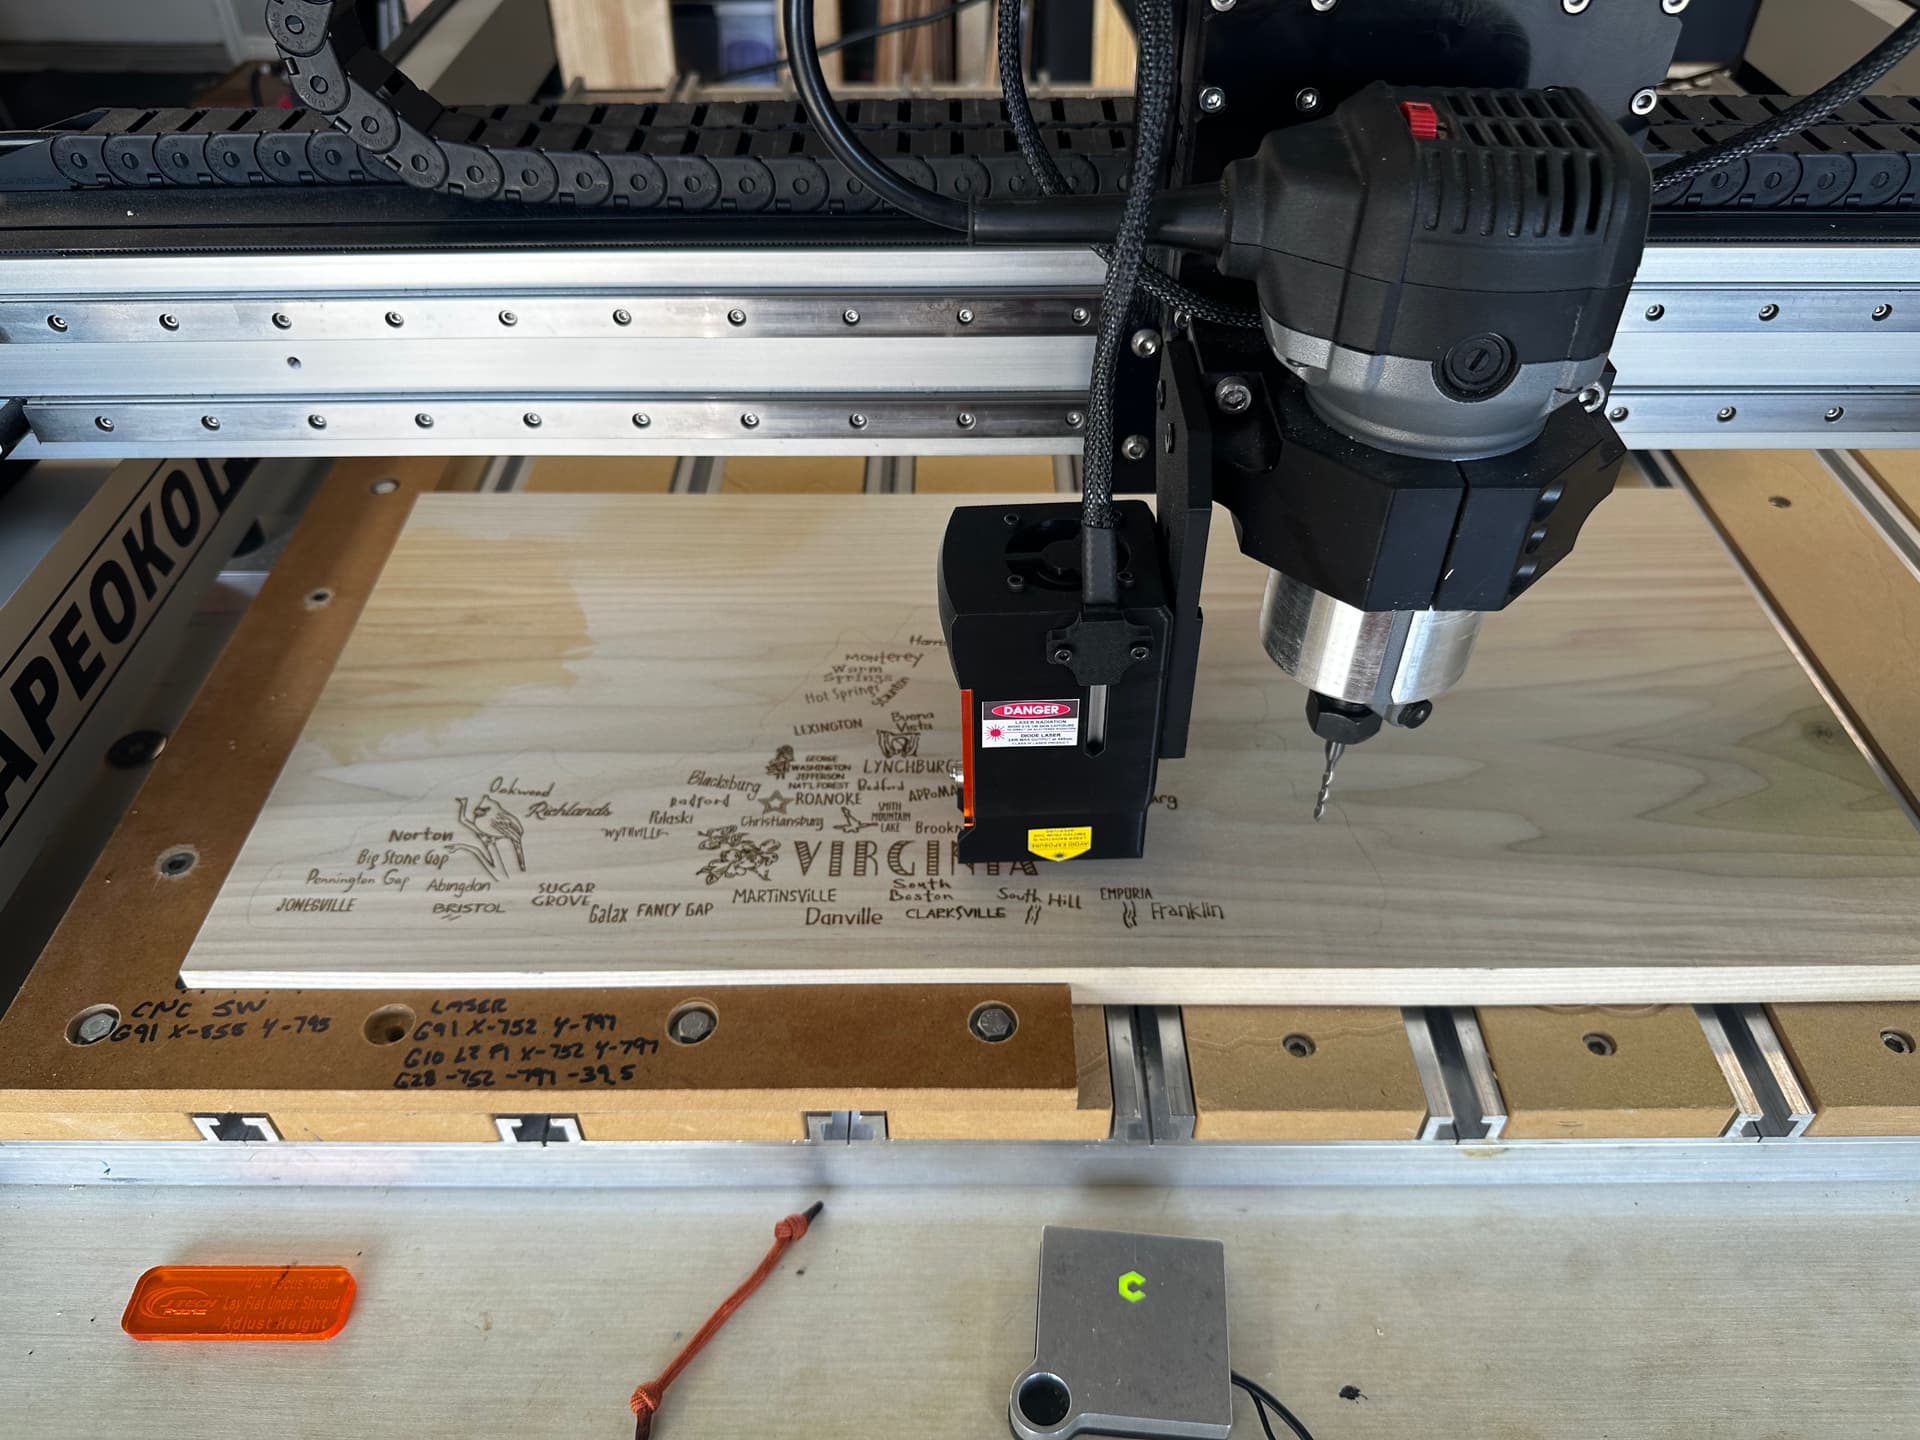 I made a new cnc dragknife for my Shapeoko xxl - Gallery - Carbide 3D  Community Site